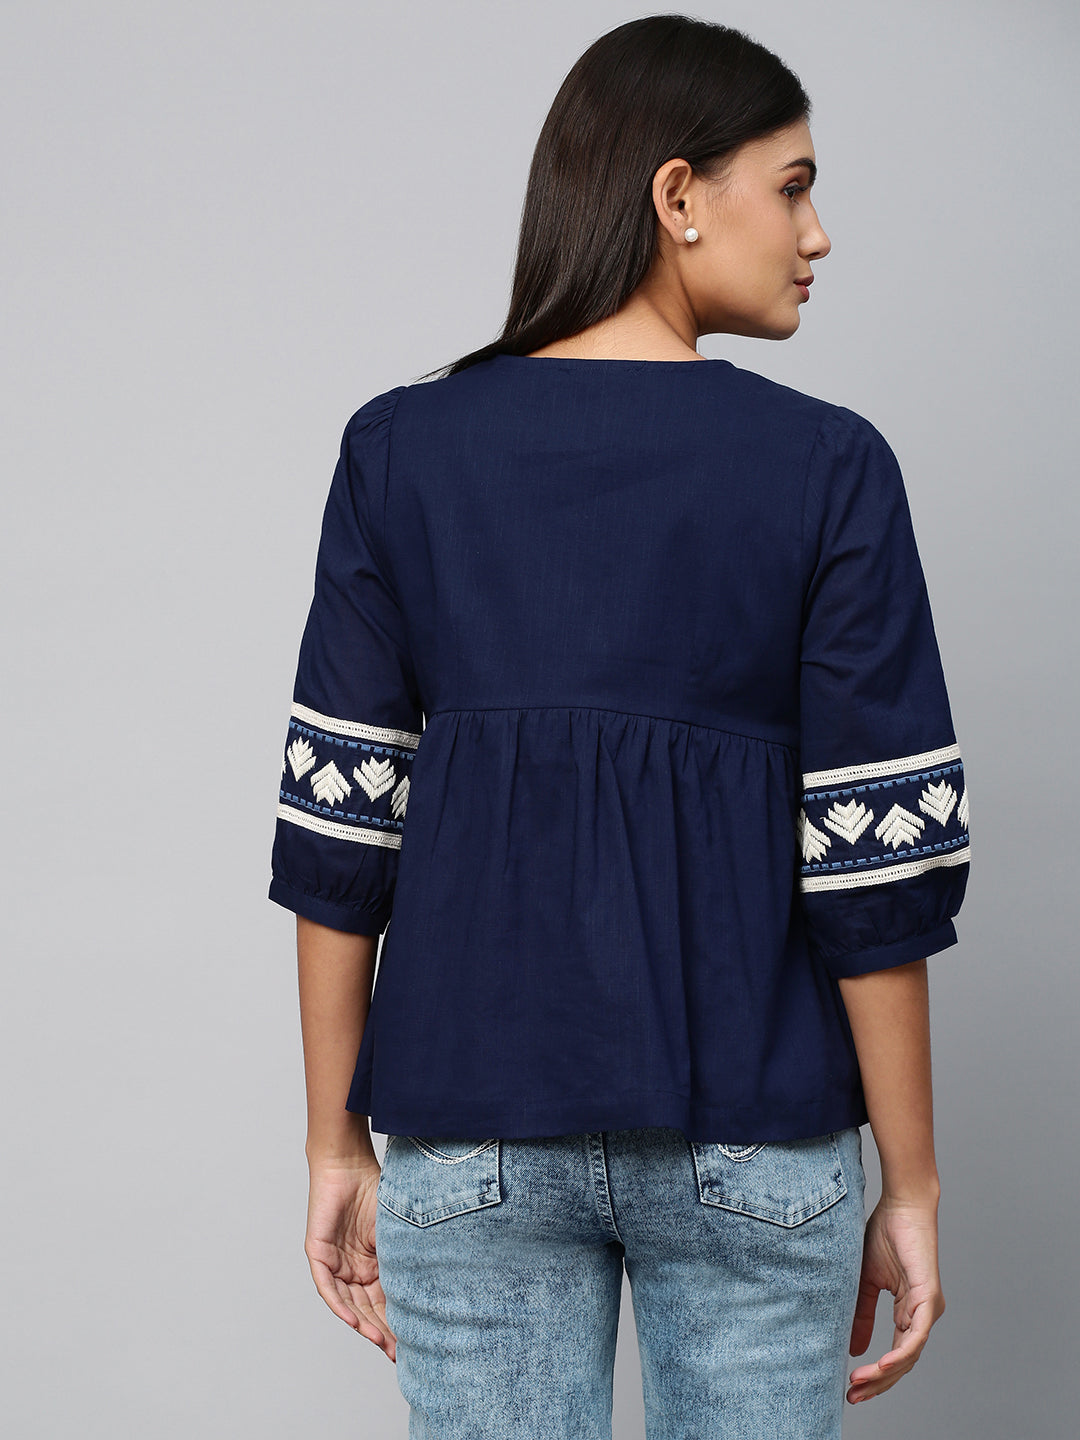 Embroidered Textured Cross Hatch Cotton Top